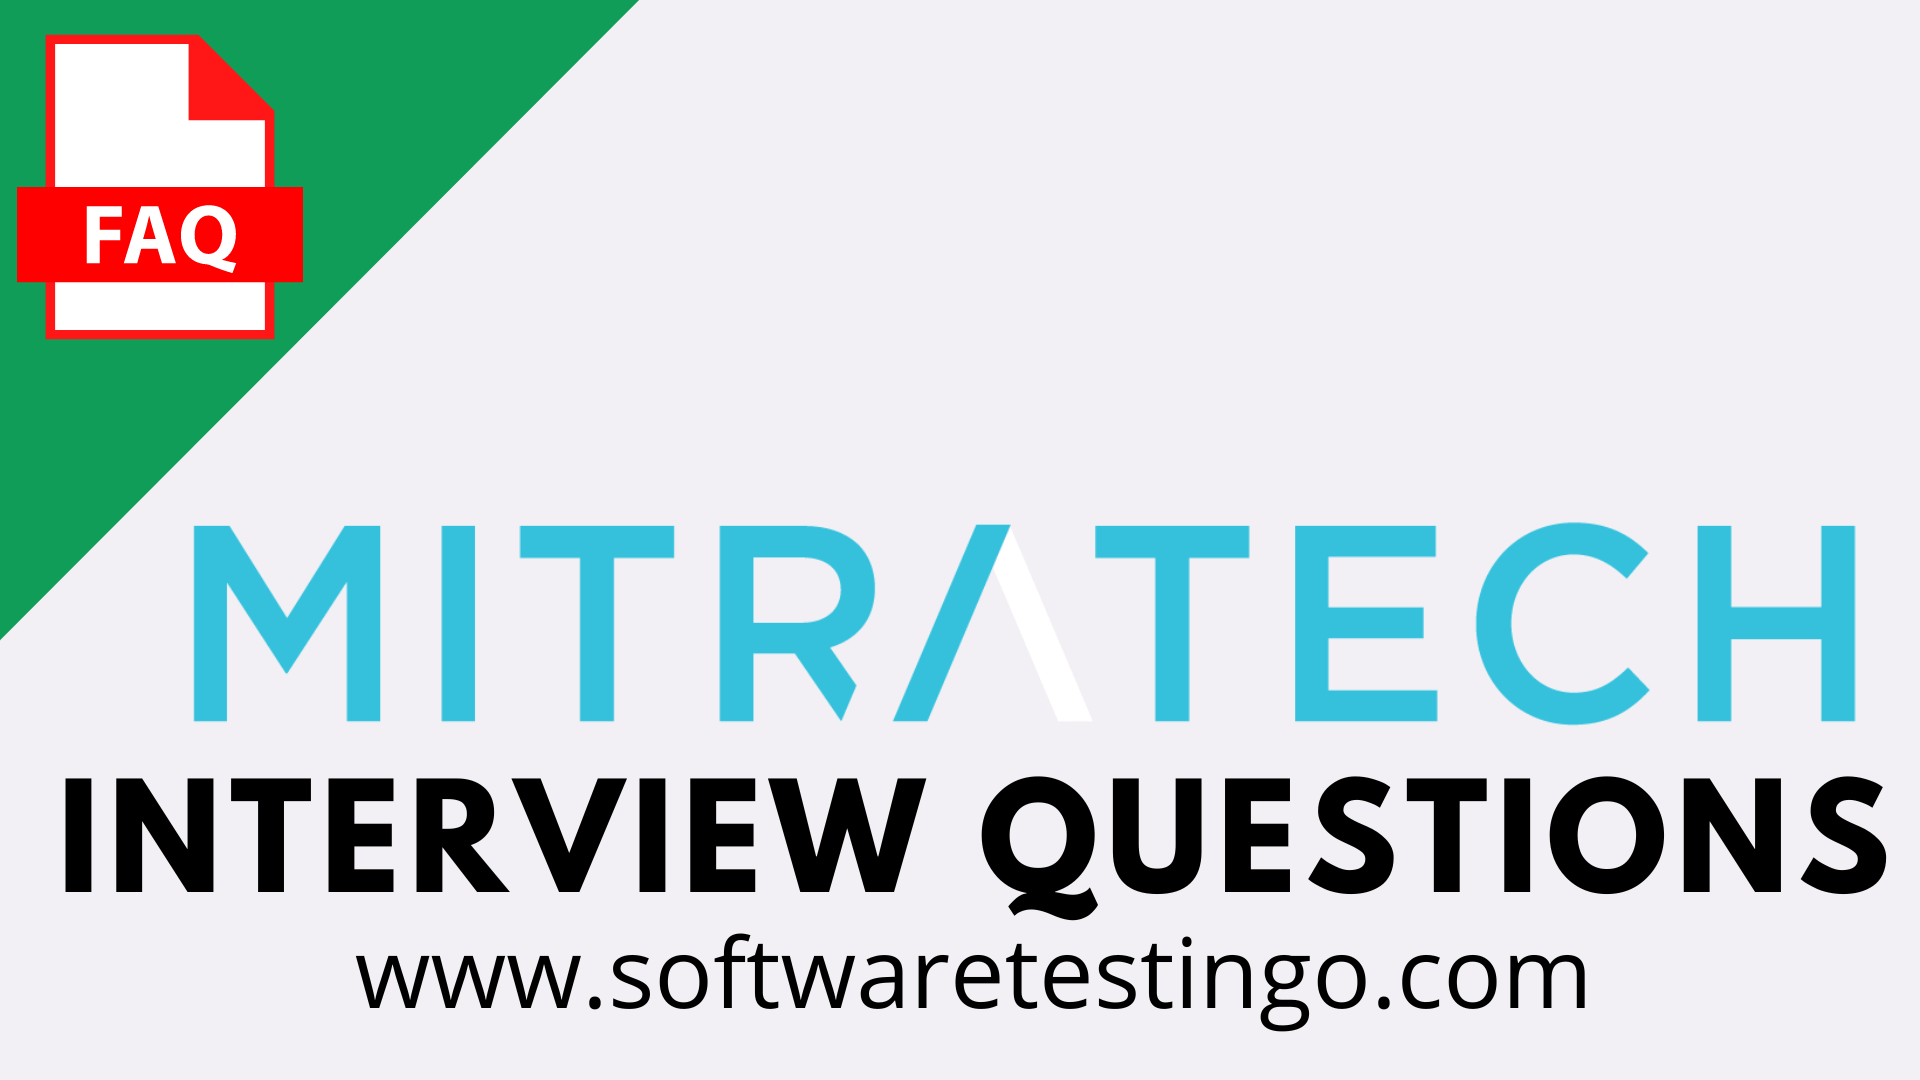 Mitratech Holdings Interview Questions